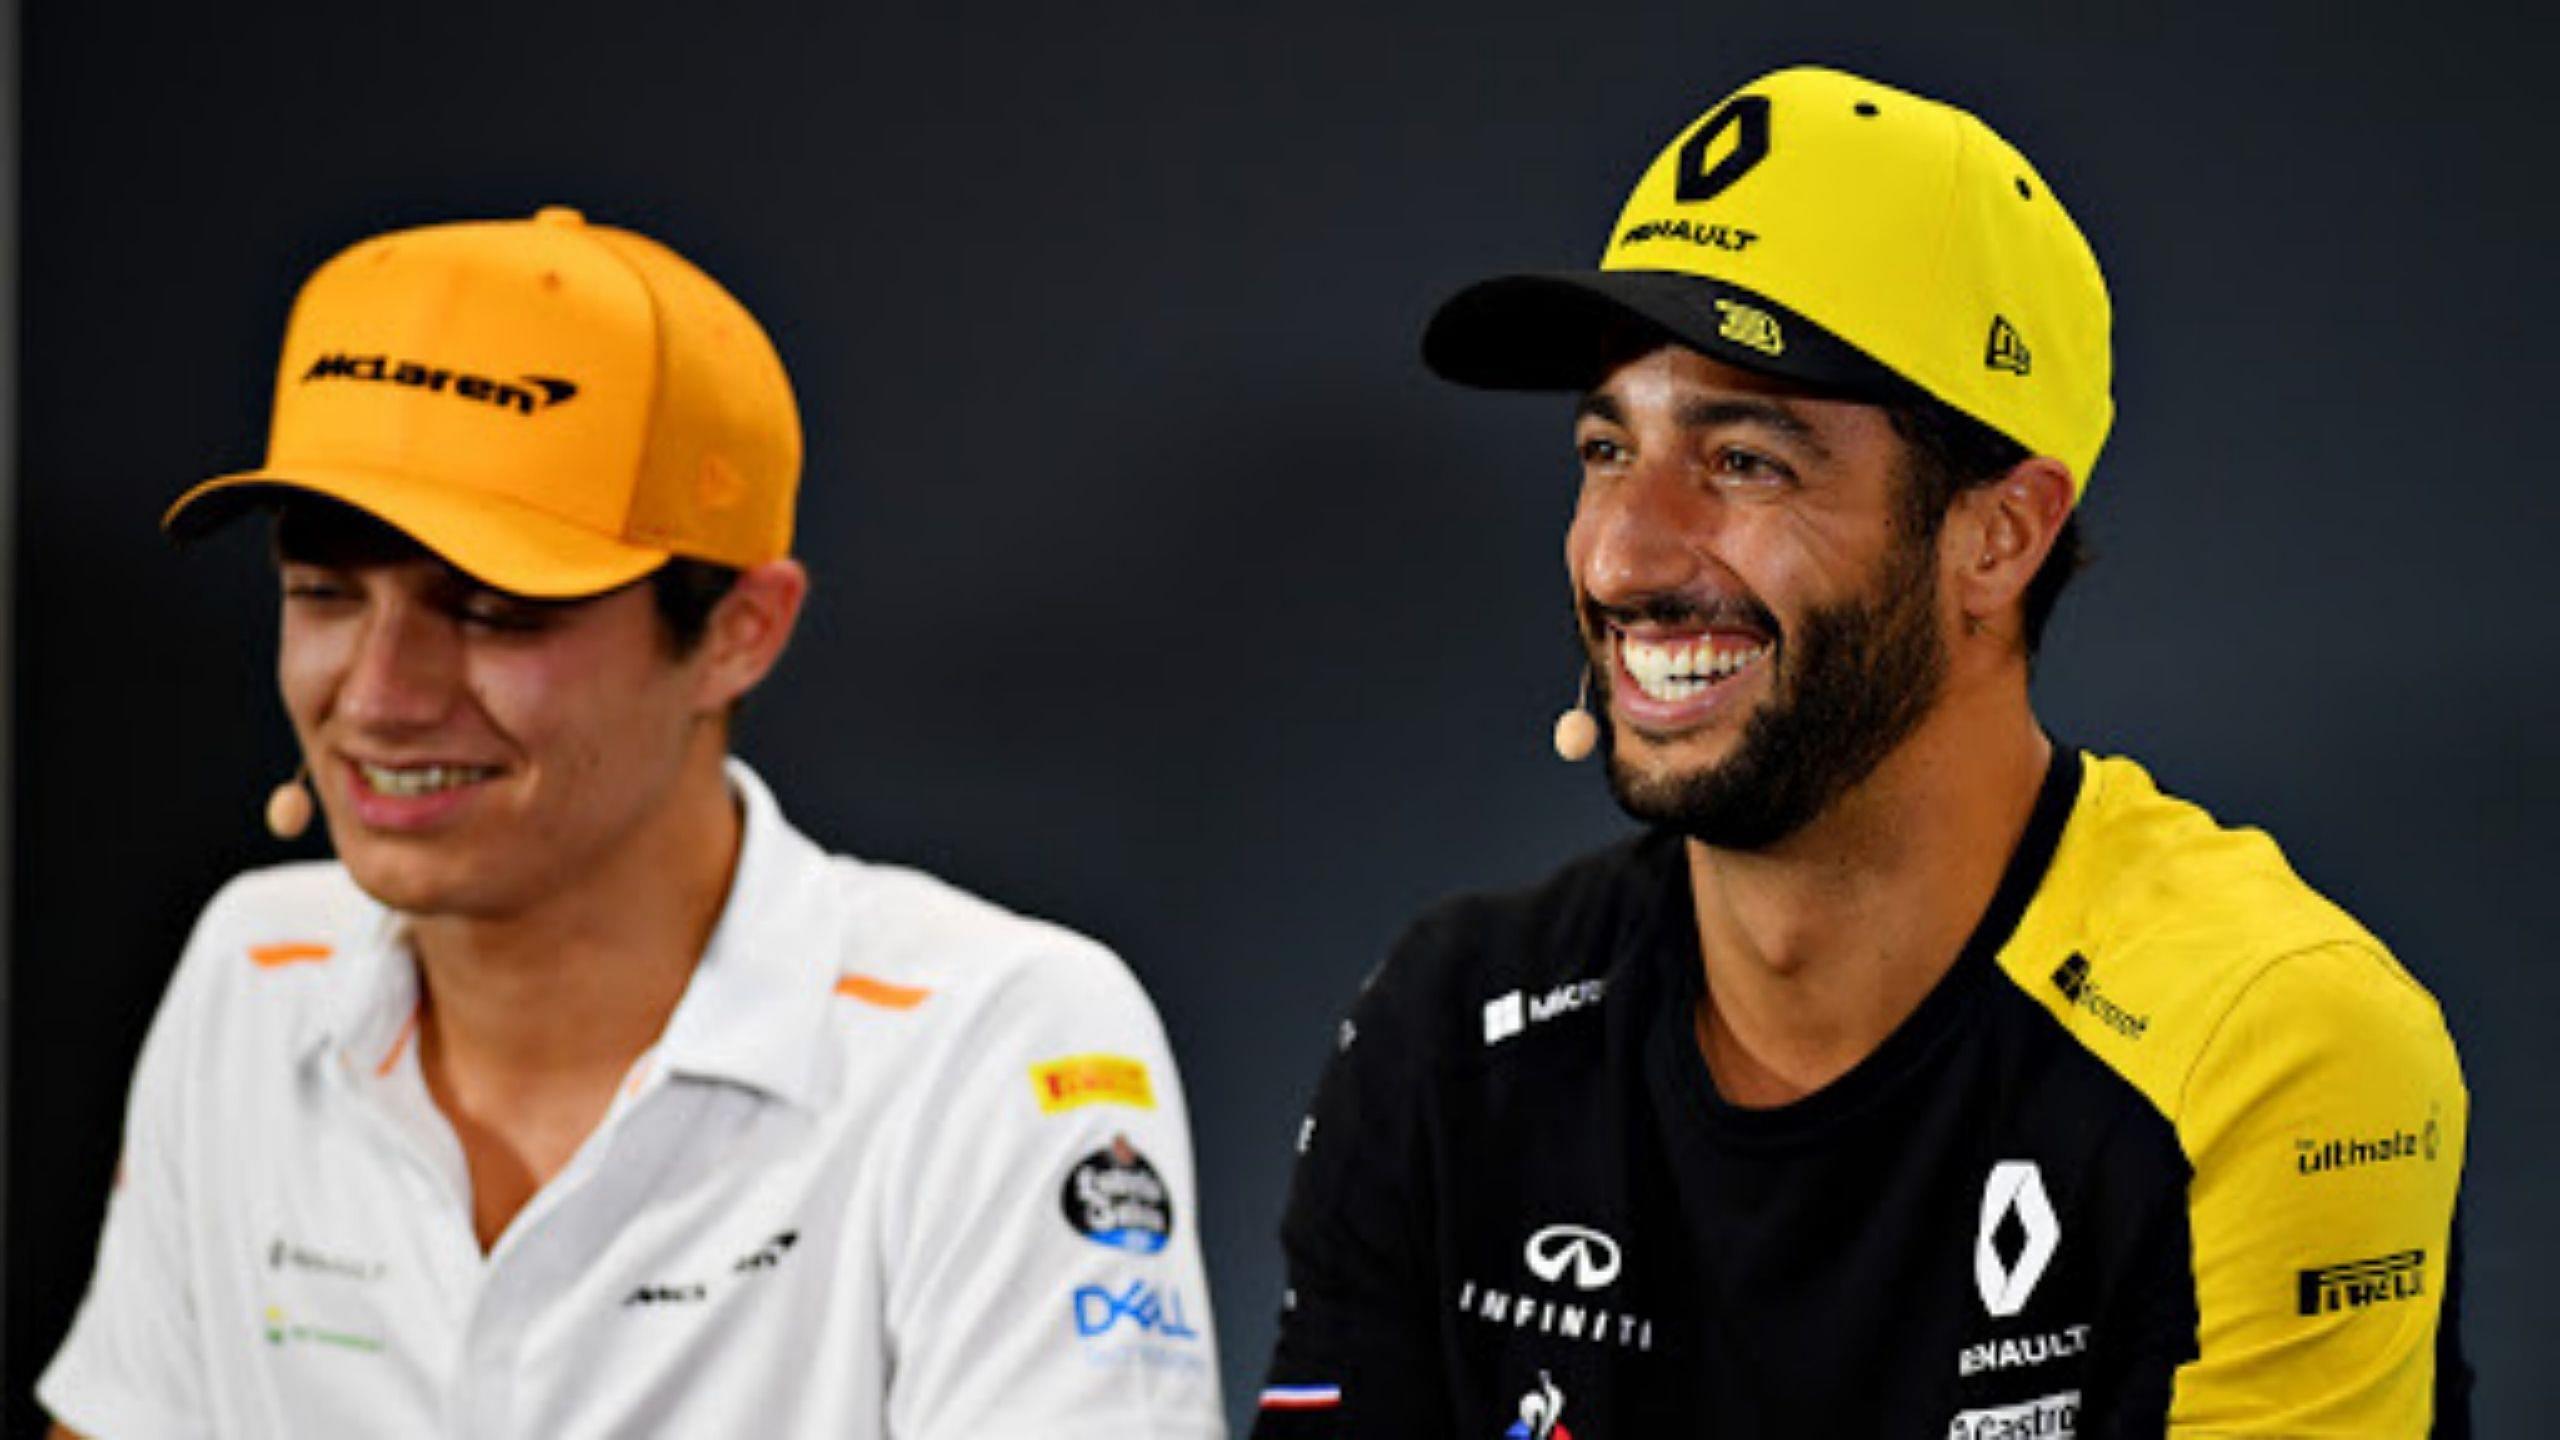 “I’m going there for business" - Daniel Ricciardo shots down suggestions of a "meme power couple" with McLaren teammate Lando Norris